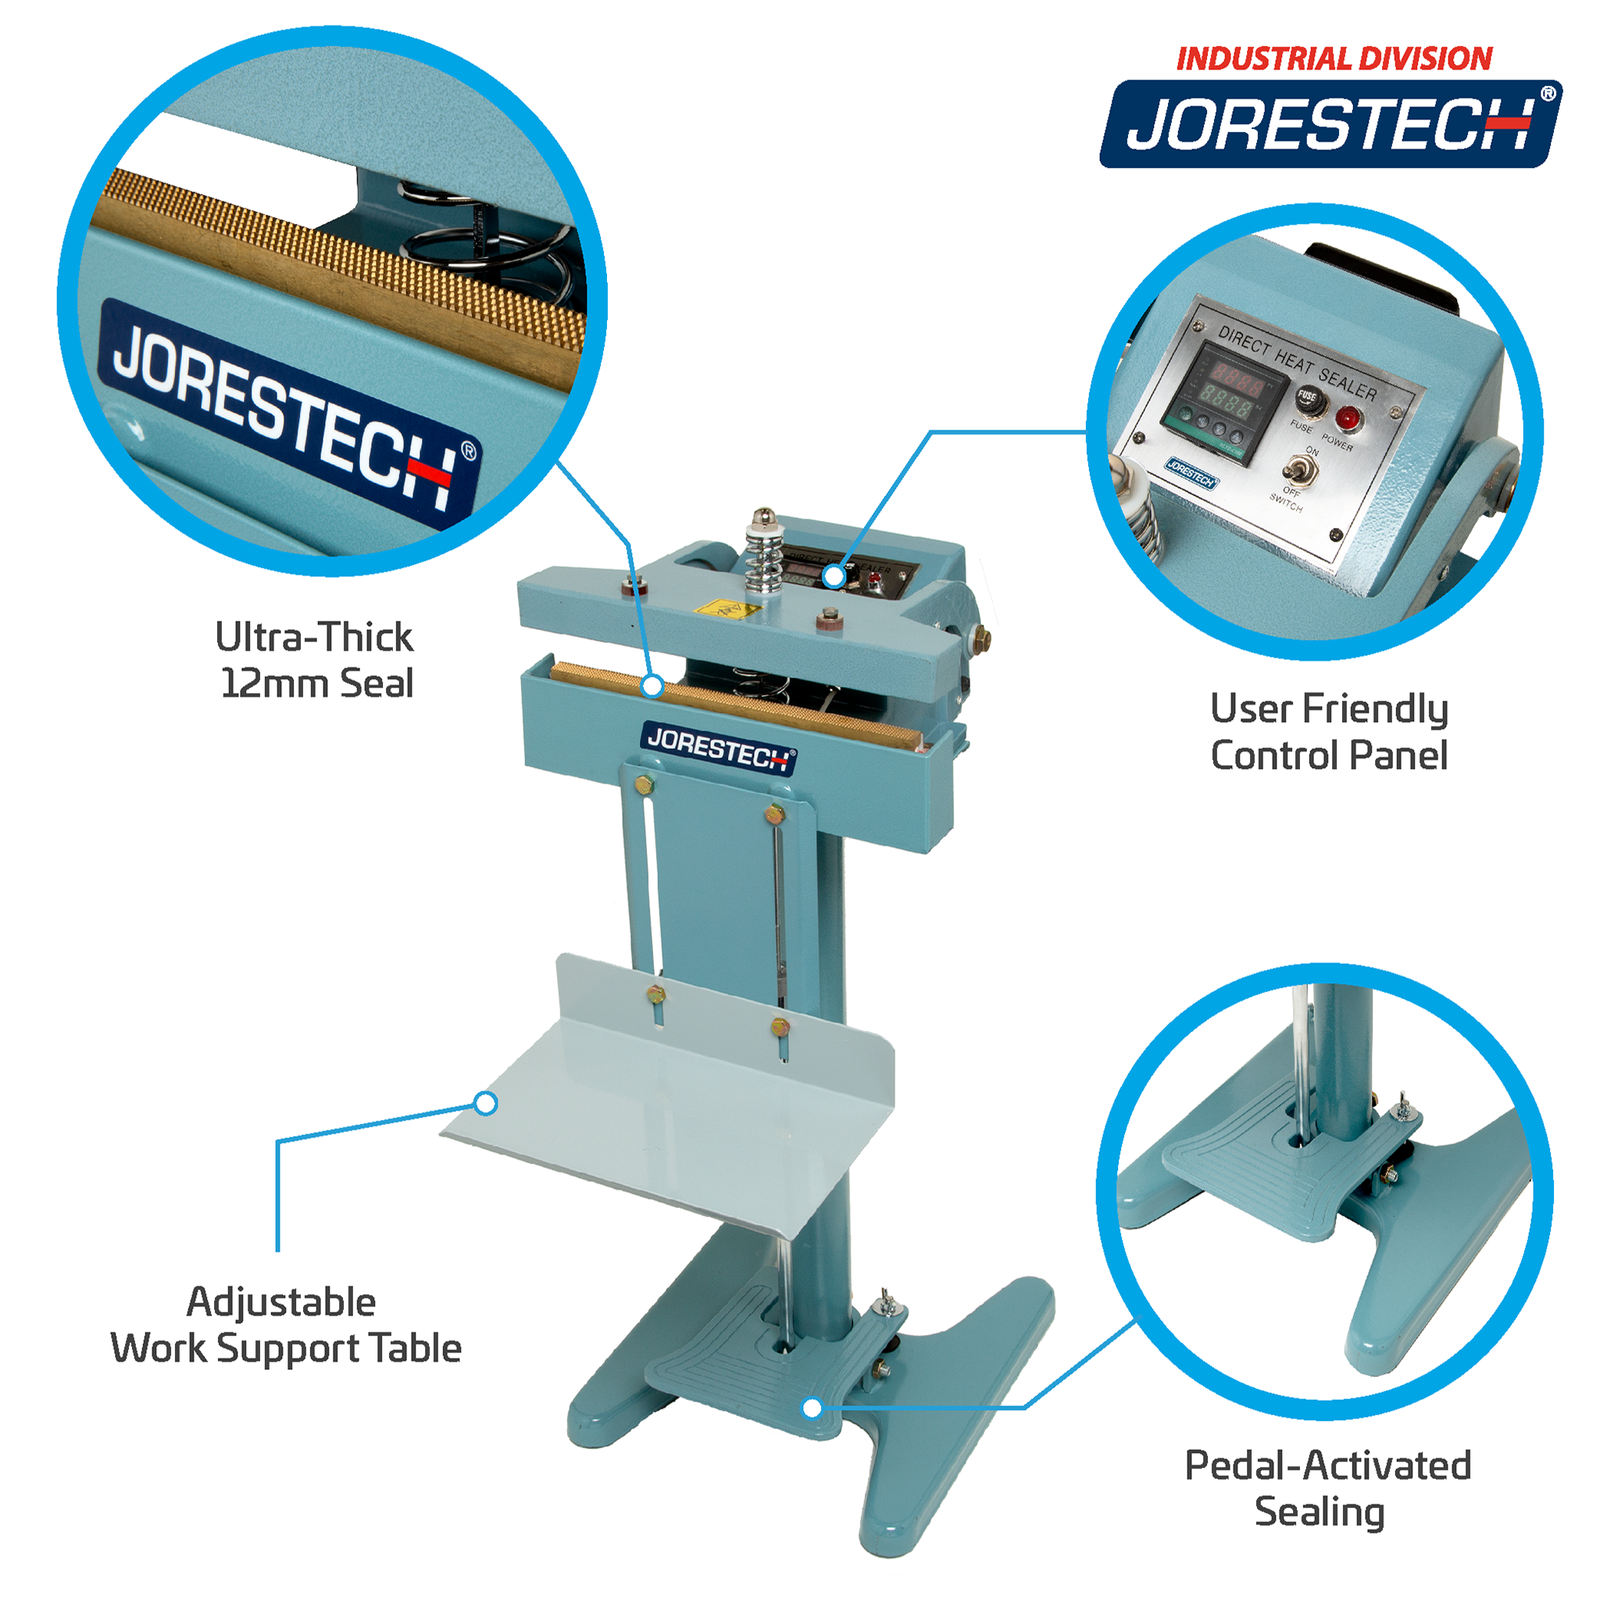 Infographic shows blue JORESTECH constant foot impulse bag sealer with text that reads: Constant Heat Sealing System, User Friendly Control Panel, Adjustable Work Support Table, and Pedal-Activated Sealing